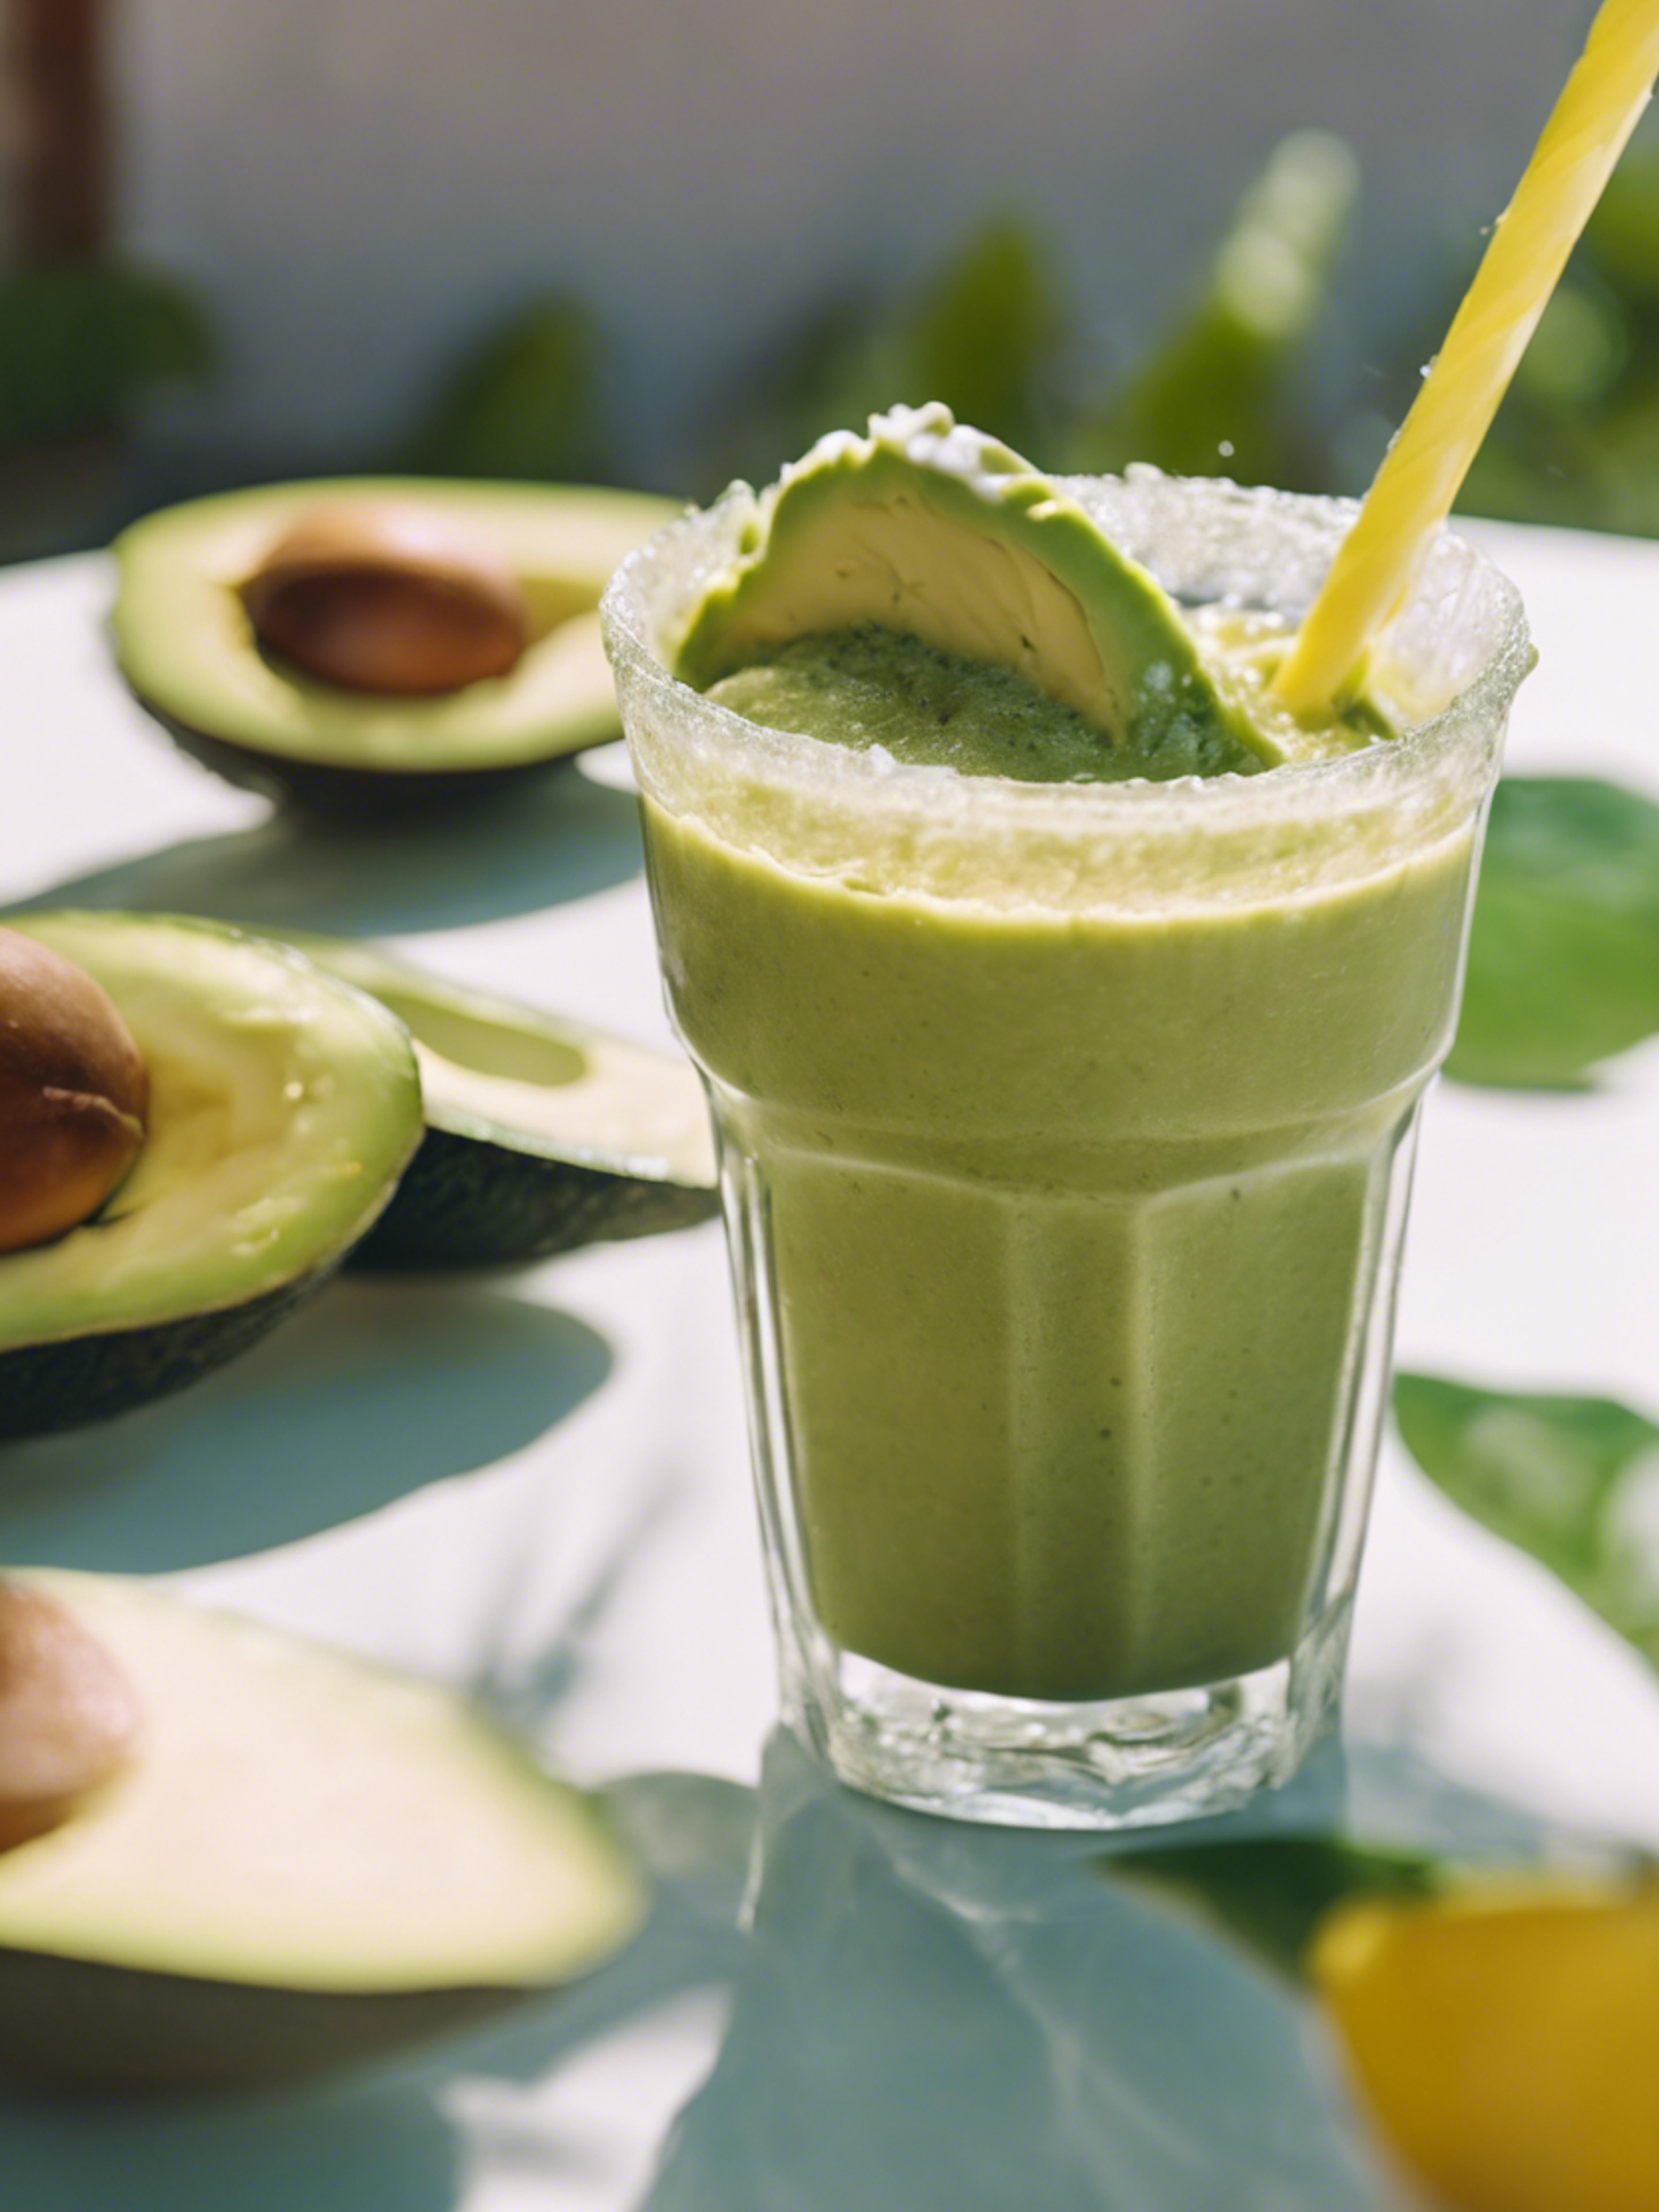 A playful avocado sipping on tropical smoothie on a hot summer day Tapet[3b128a2f6f1a4fb38d08]